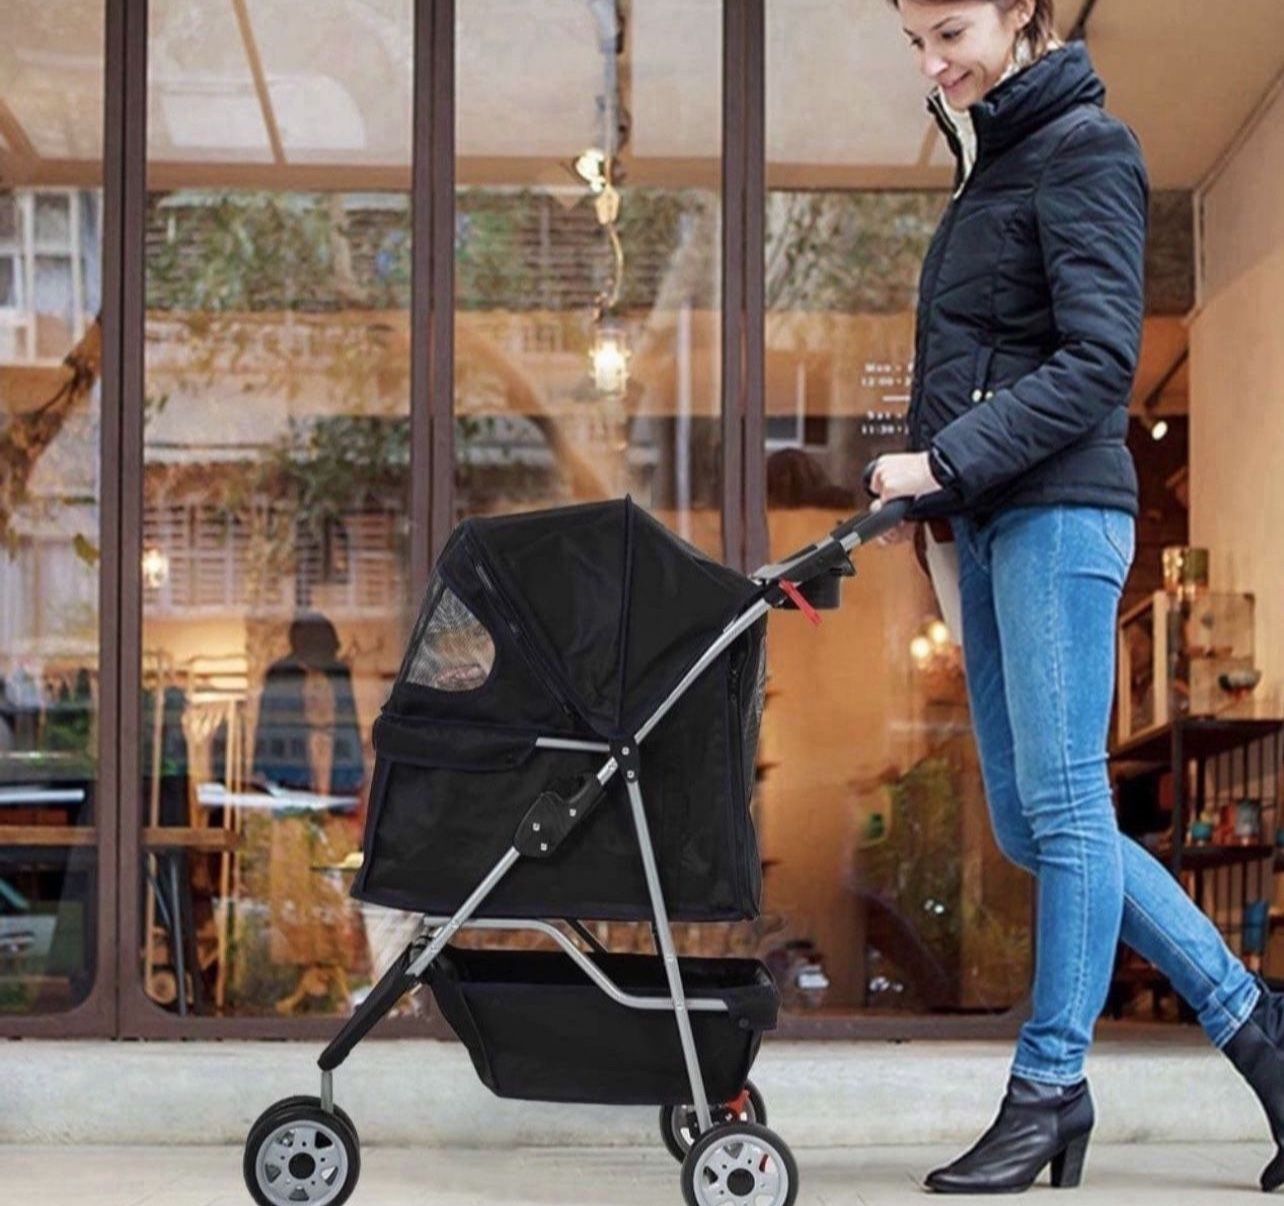 BestPet 3 Wheels Pet Stroller Dog Cat Cage Jogger Stroller for Medium Small Dogs Cats Travel Folding Carrier Waterproof Puppy Stroller with Cup Holder